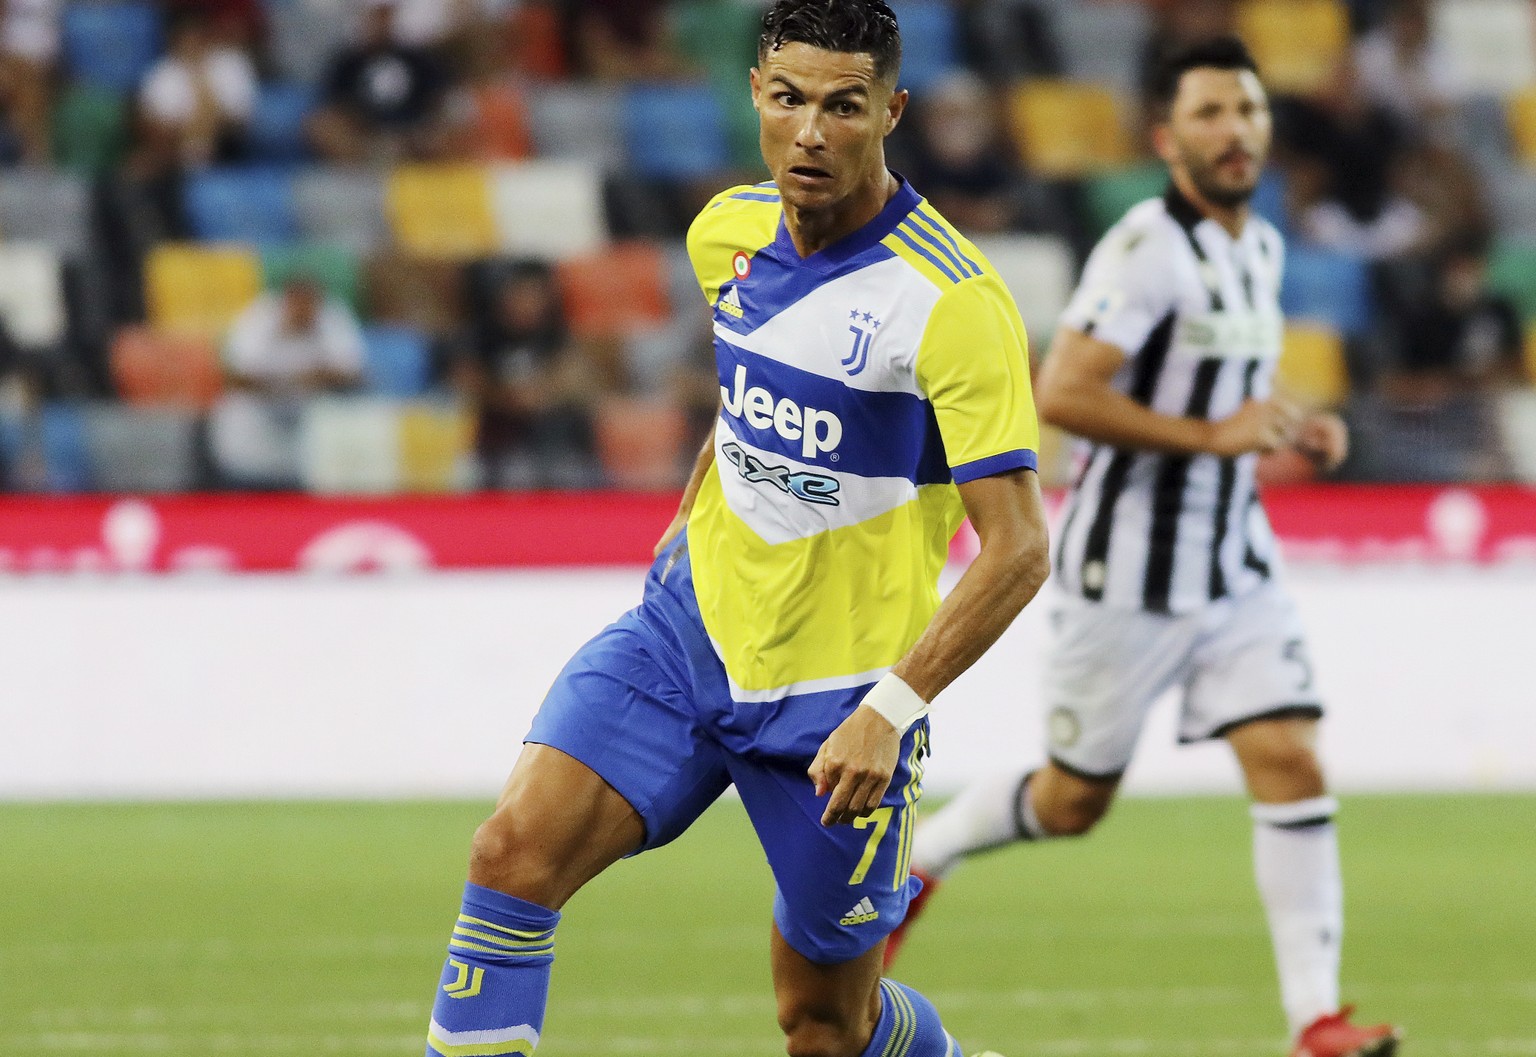 Juventus&#039; Cristiano Ronaldo goes for the ball during the Serie A soccer match between Udinese and Juventus, at the Dacia Arena in Udine, Italy, Sunday, Aug. 22, 2021. (Andrea Bressanutti/LaPresse ...